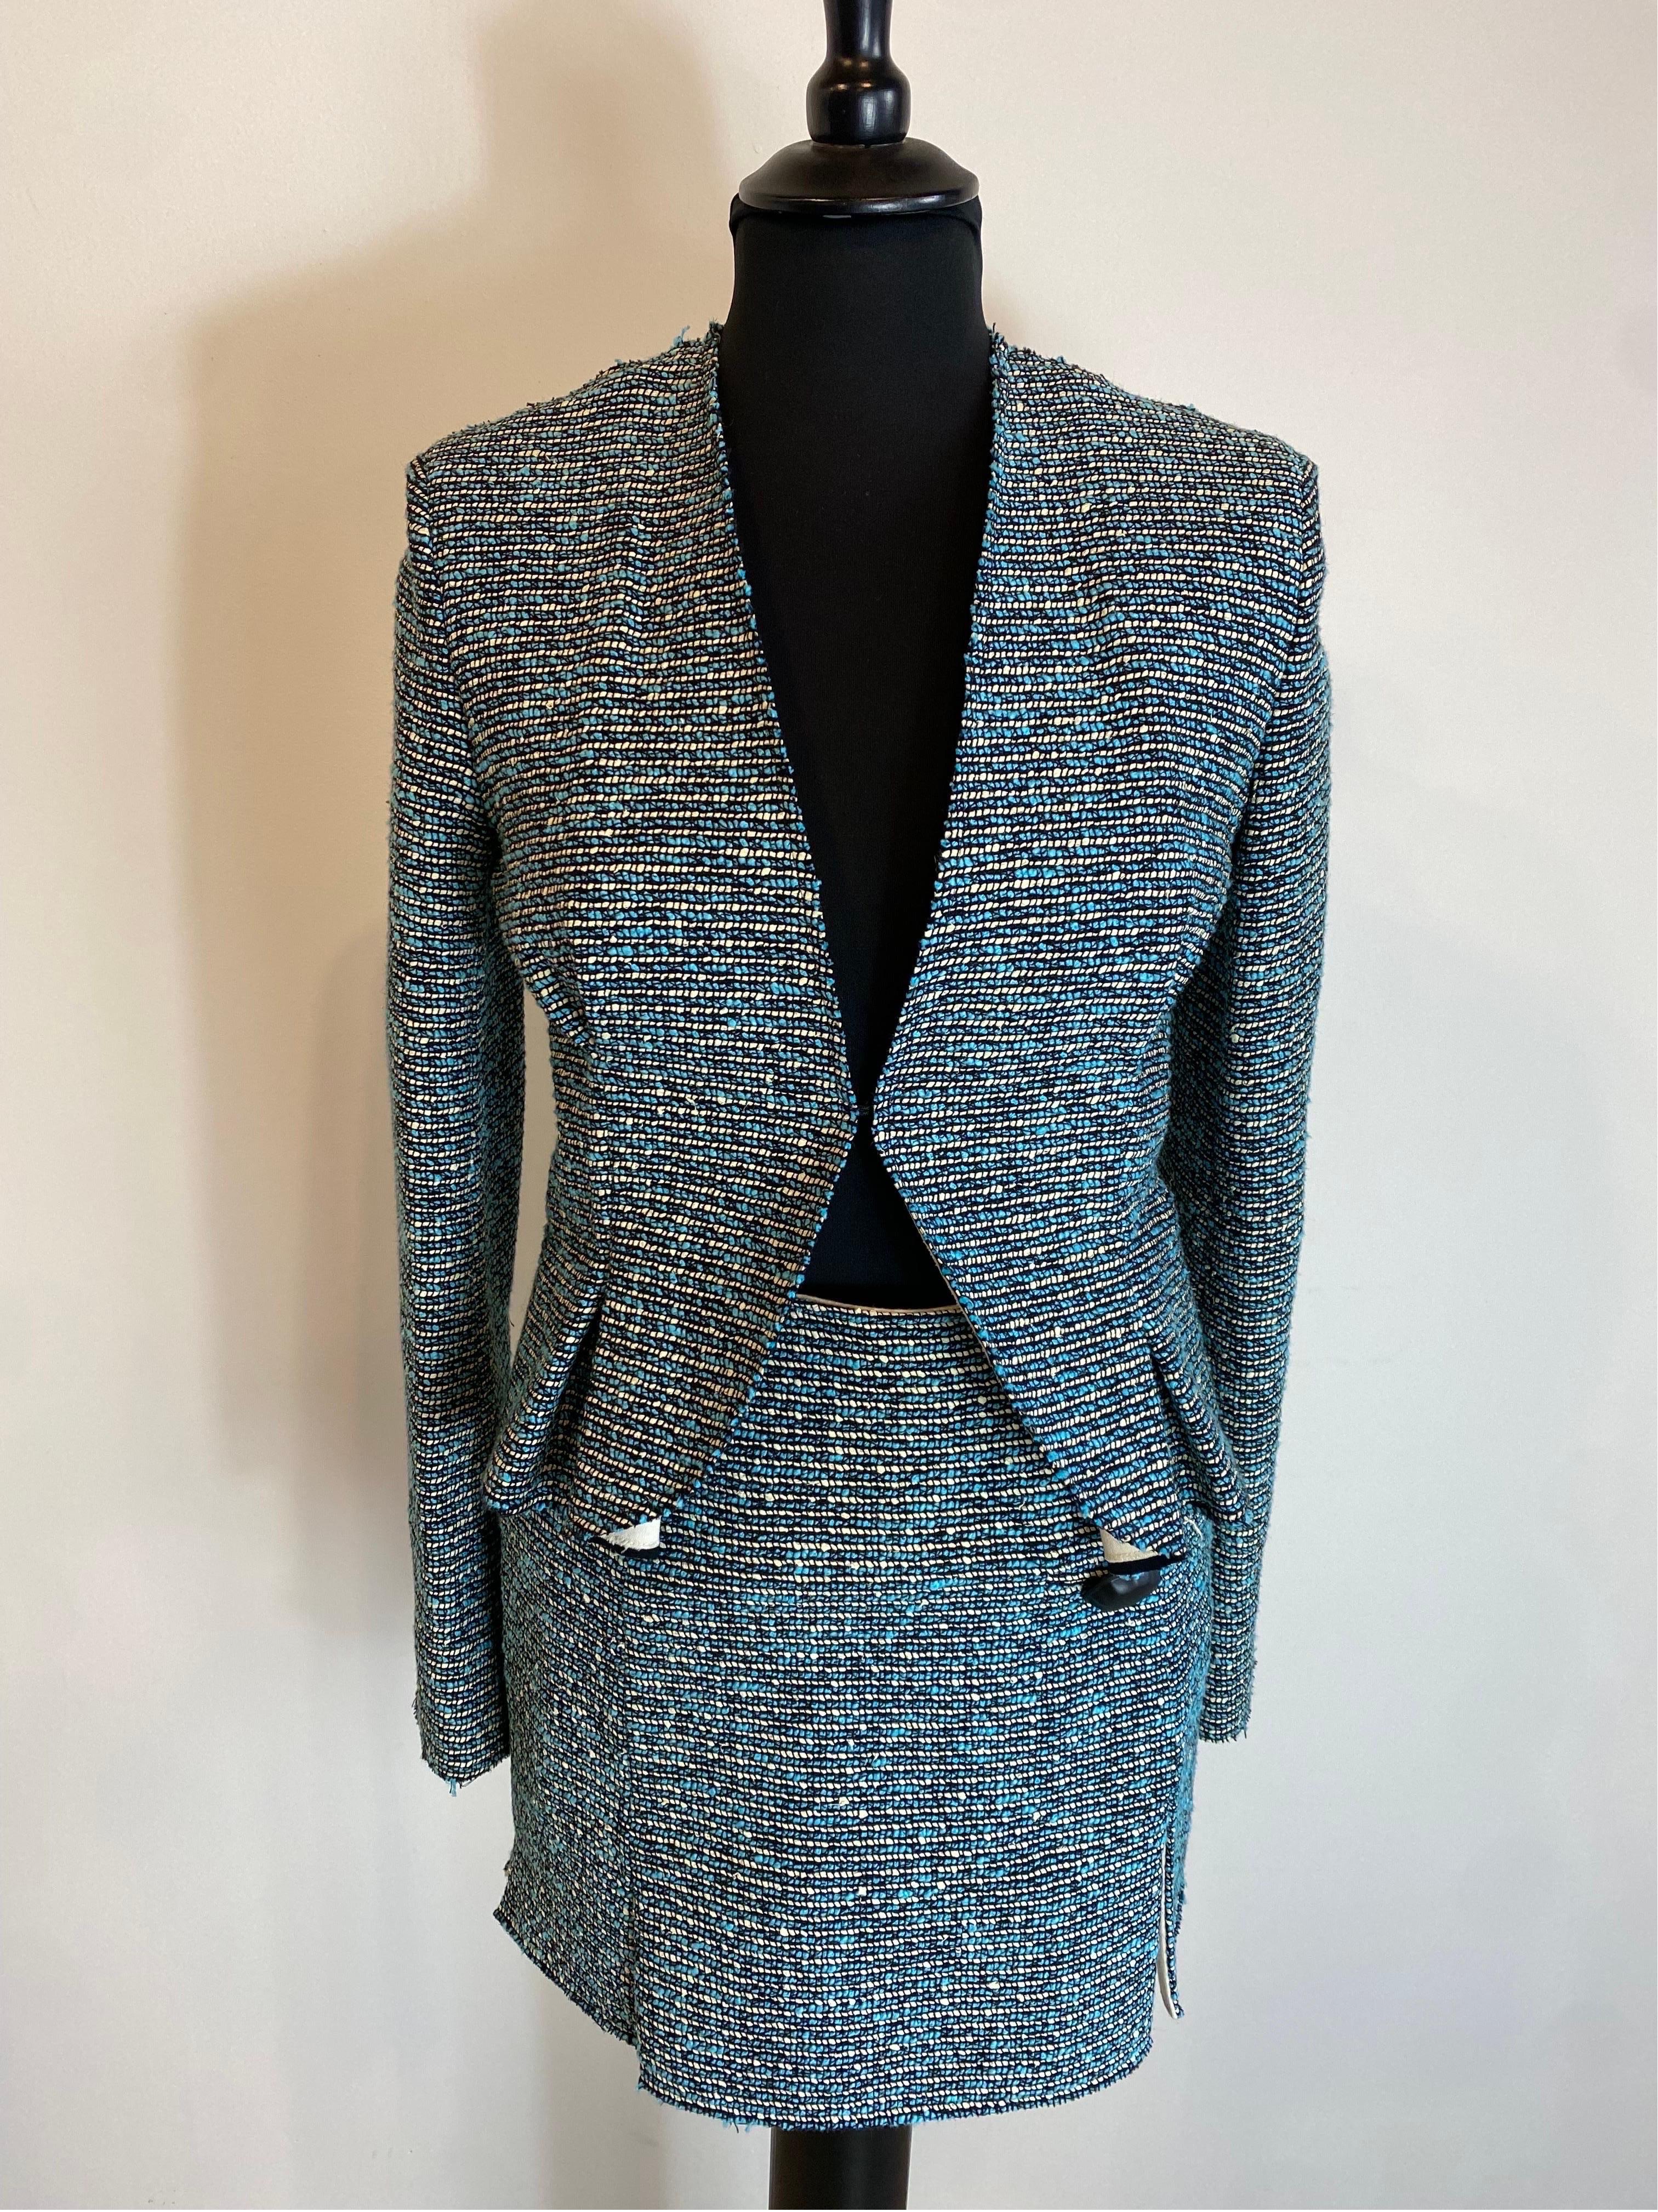 Balenciaga suit. Jacket + skirt.
Spring 2013 collection by Nicolas Ghesquiere.
Made of cotton, wool, polyurethane, polyamide and acrylic.
French size 36 which corresponds to an Italian 40.
Shoulders 40 cm
Bust 44 cm
Waist 40cm
Length 50 cm
The skirt